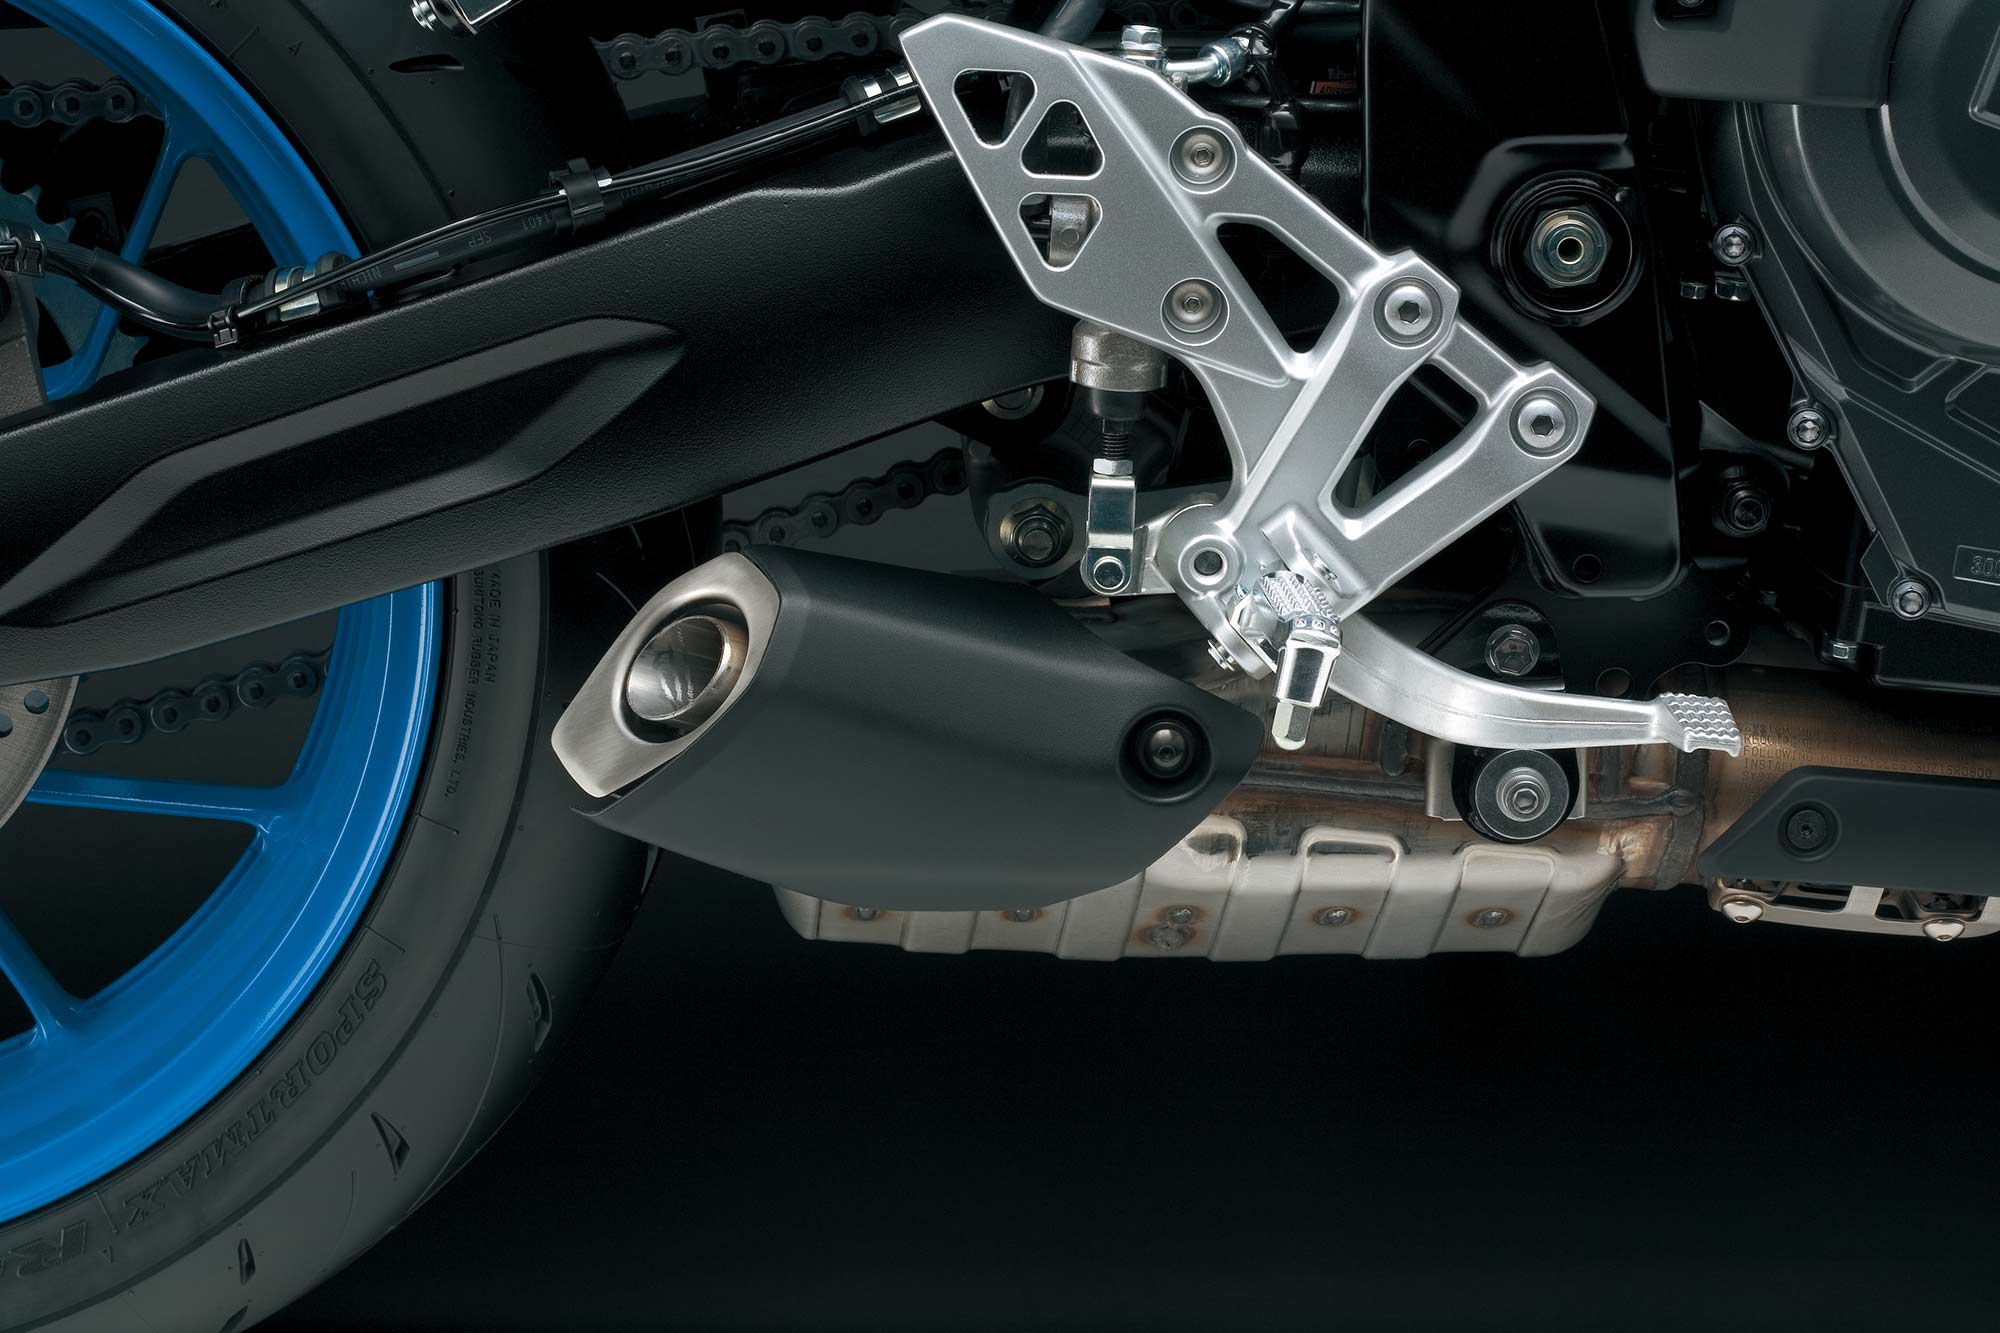 The mid-pipe leads into an under-chassis muffler that promises a unique and exciting exhaust note.